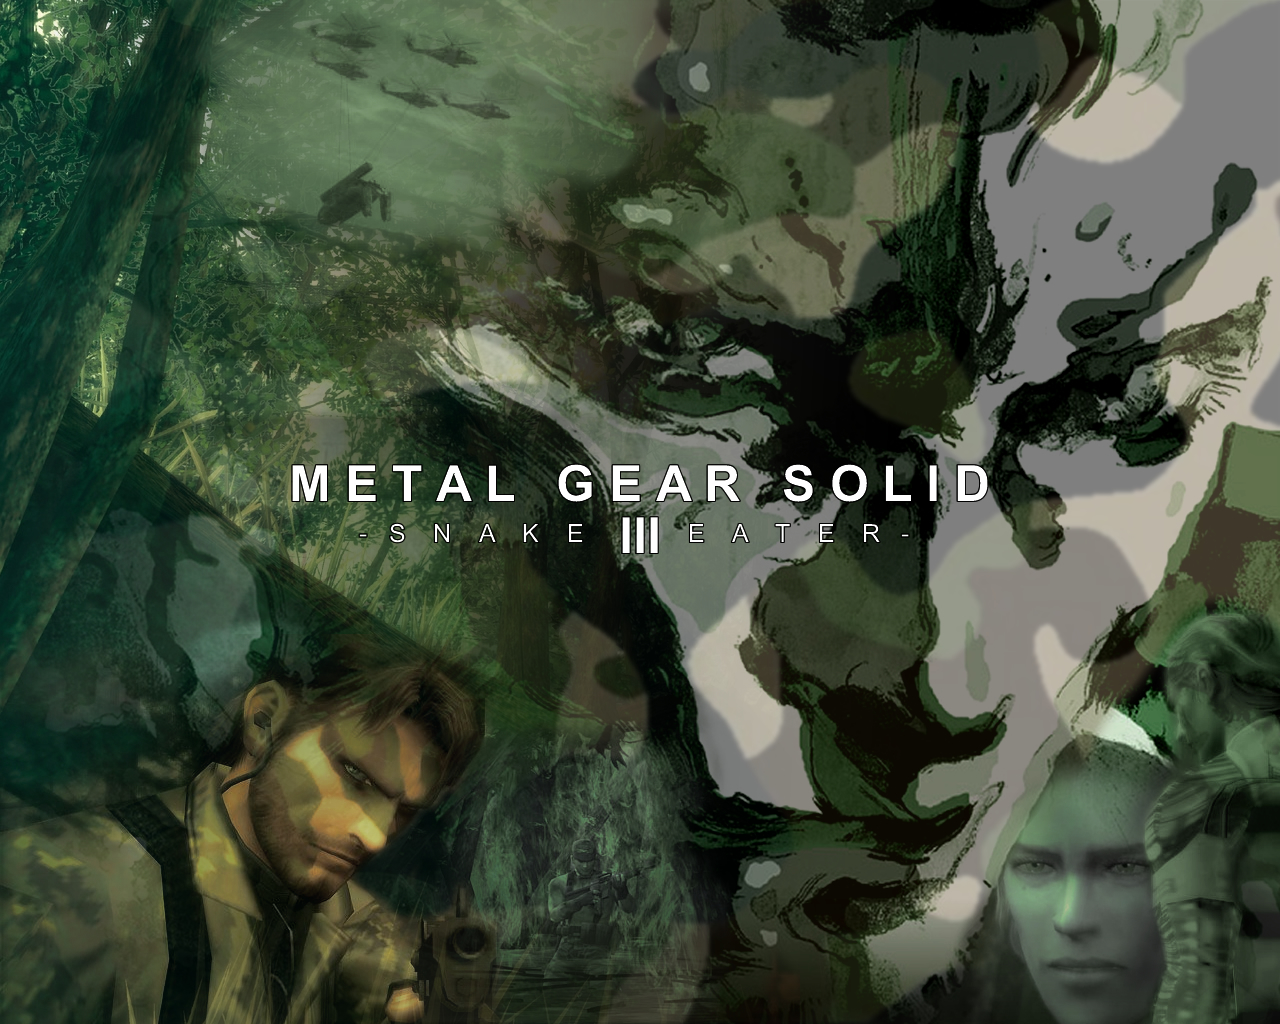 MGS3 Snake Eater by DjG Wp on